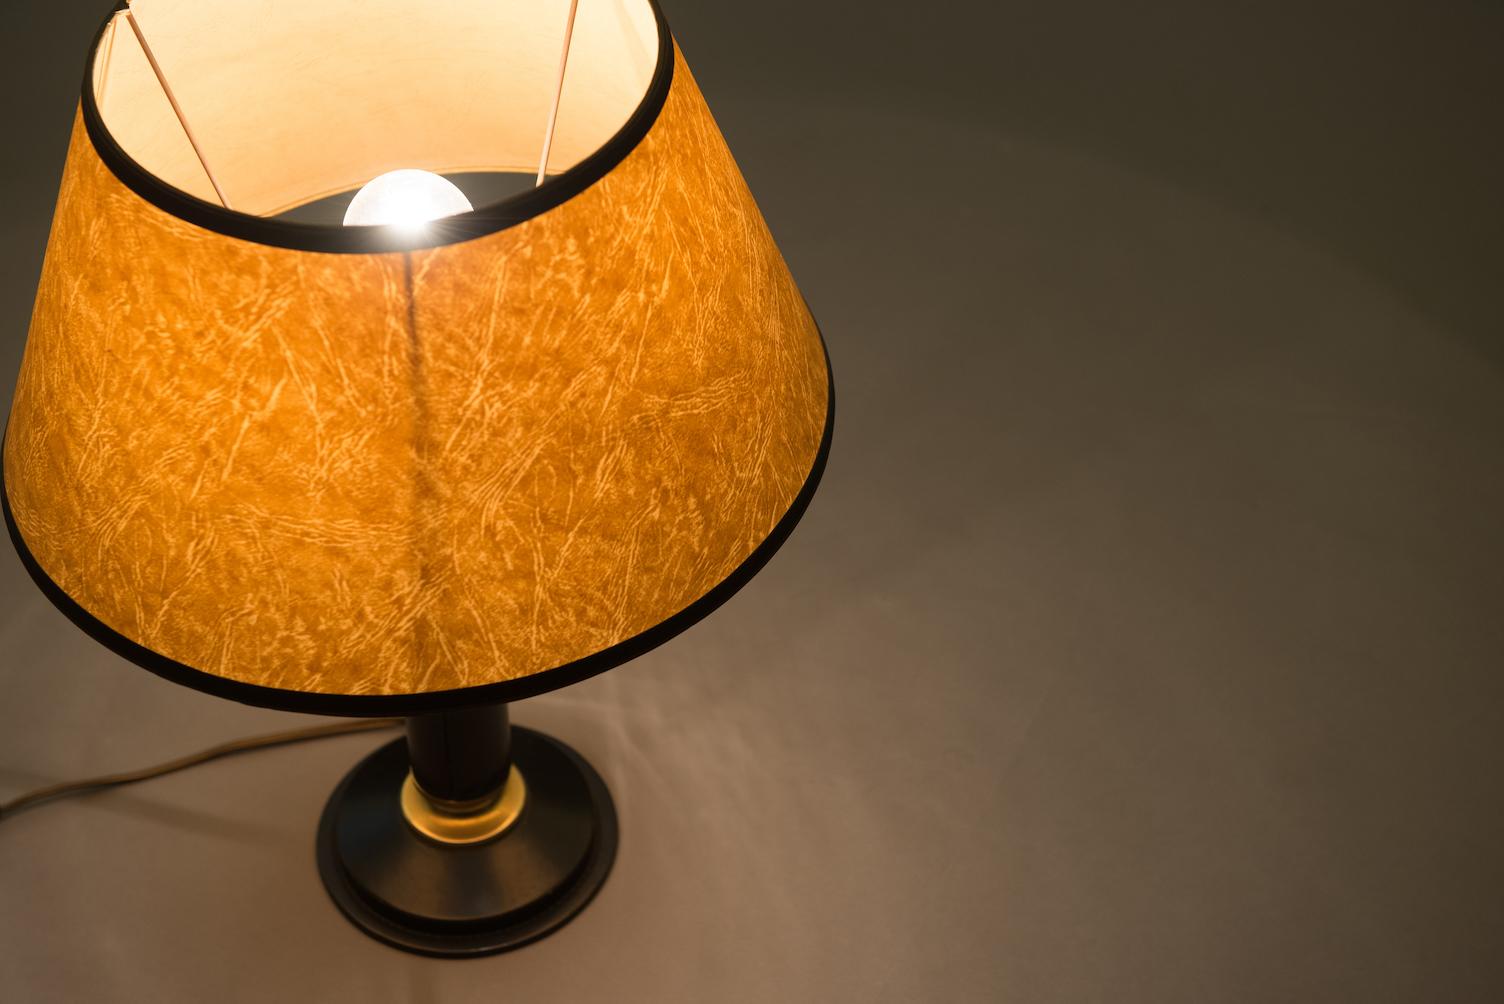 Mid-century modern table lamp in the style of Jacques Adnet 1